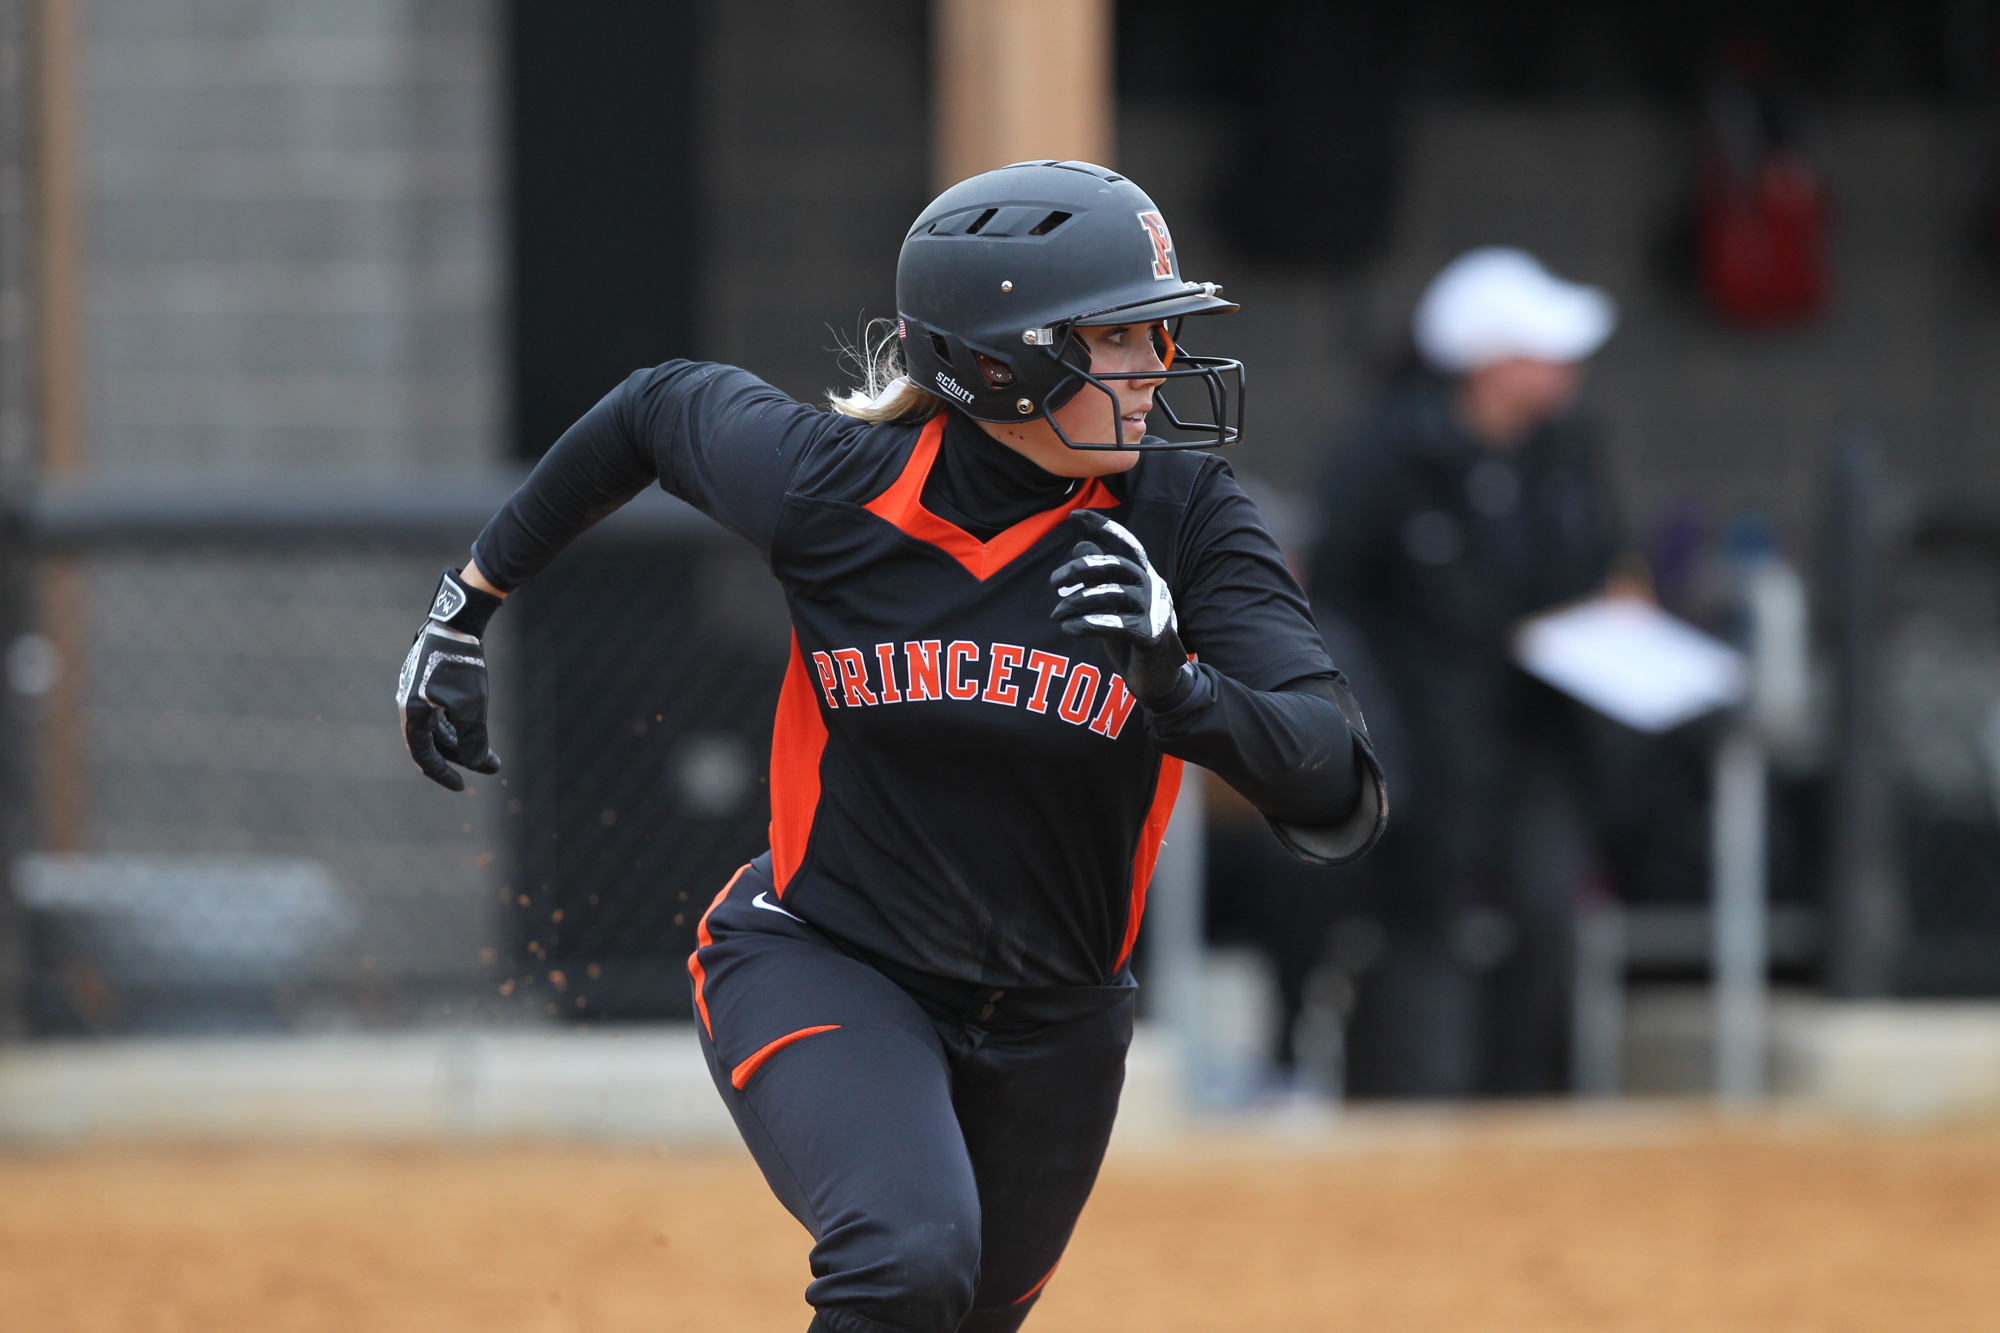 Mustangs softball grad Mackenzie Meyer made the Ivy League All-Rookie Team at Princeton University. Courtesy photo.